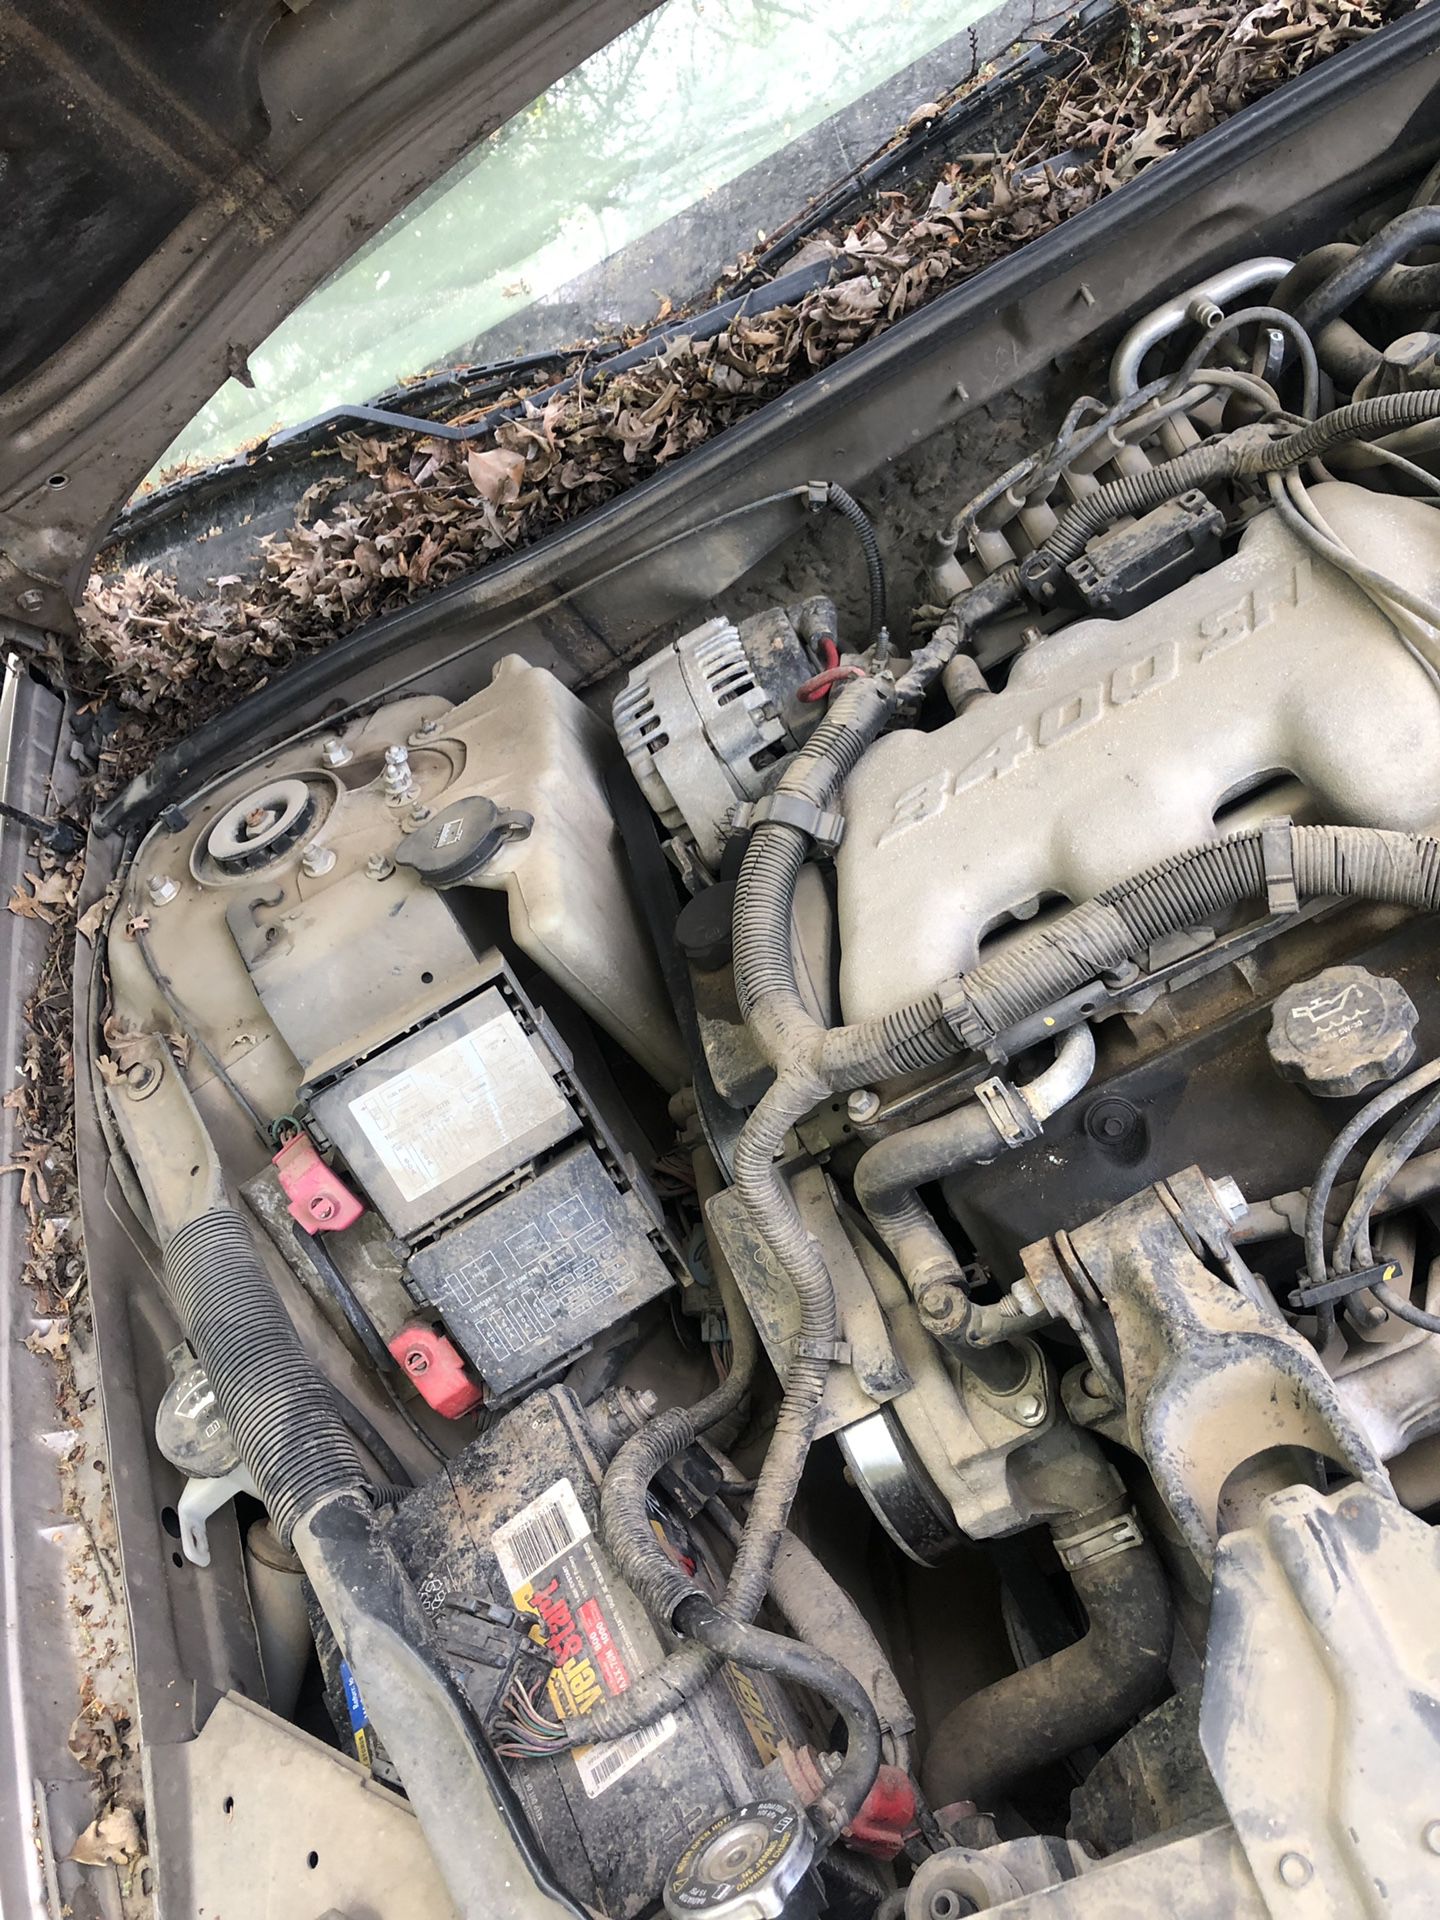 2003 Chevy impala parting out still runs needs tranny to be rebuilt only up for two weeks before I send it to pick in pull